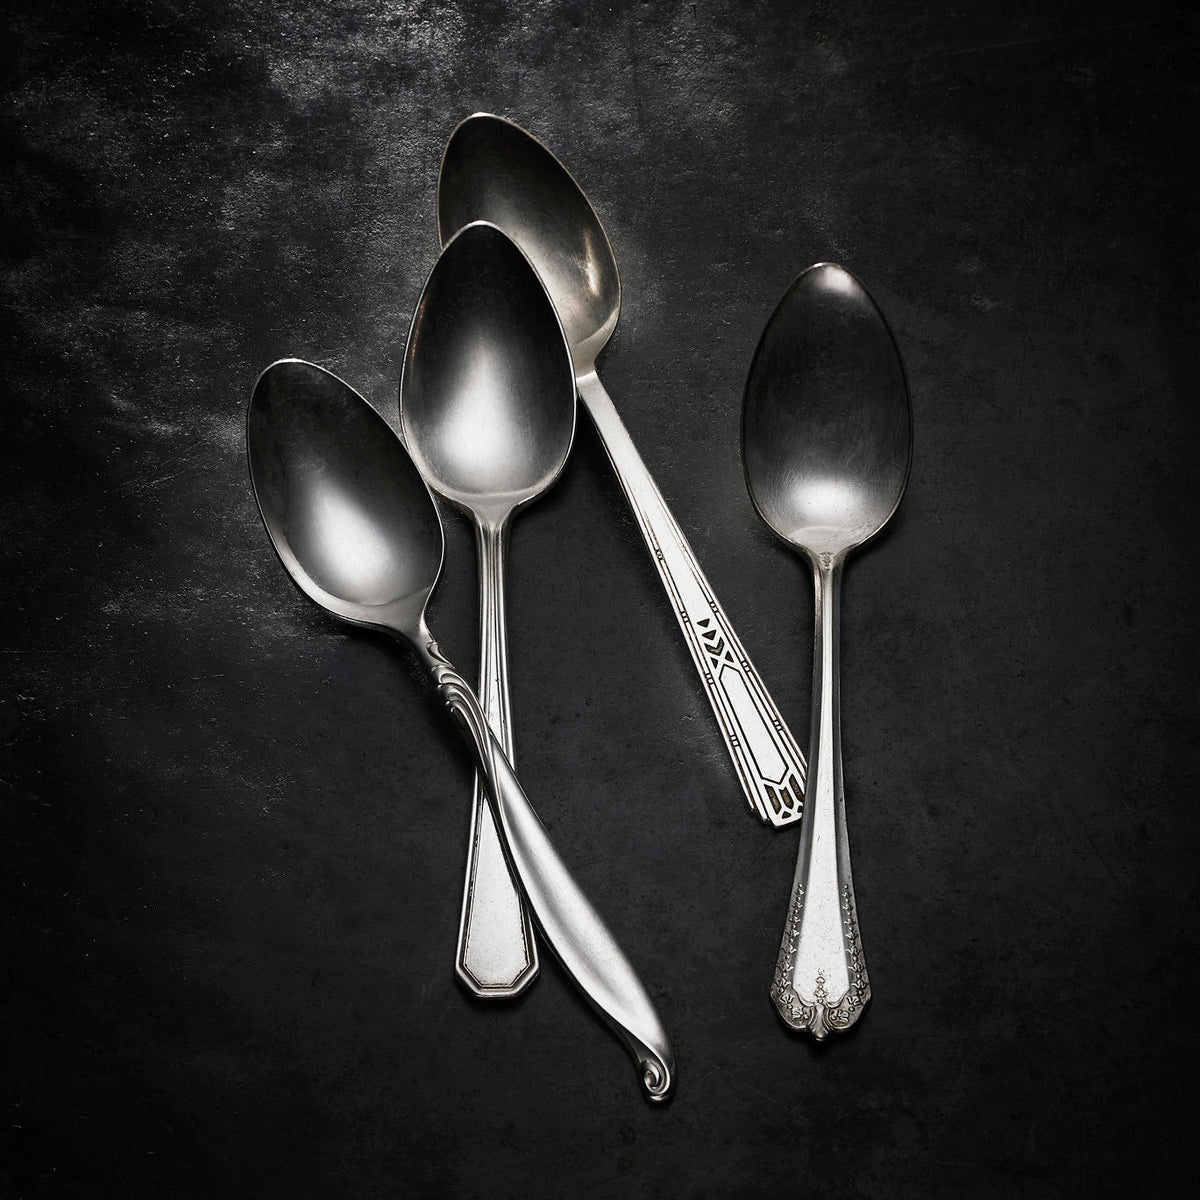 Caskata Brimfield Vintage Teaspoons displayed on a black surface, appealing to antique lovers in New England.